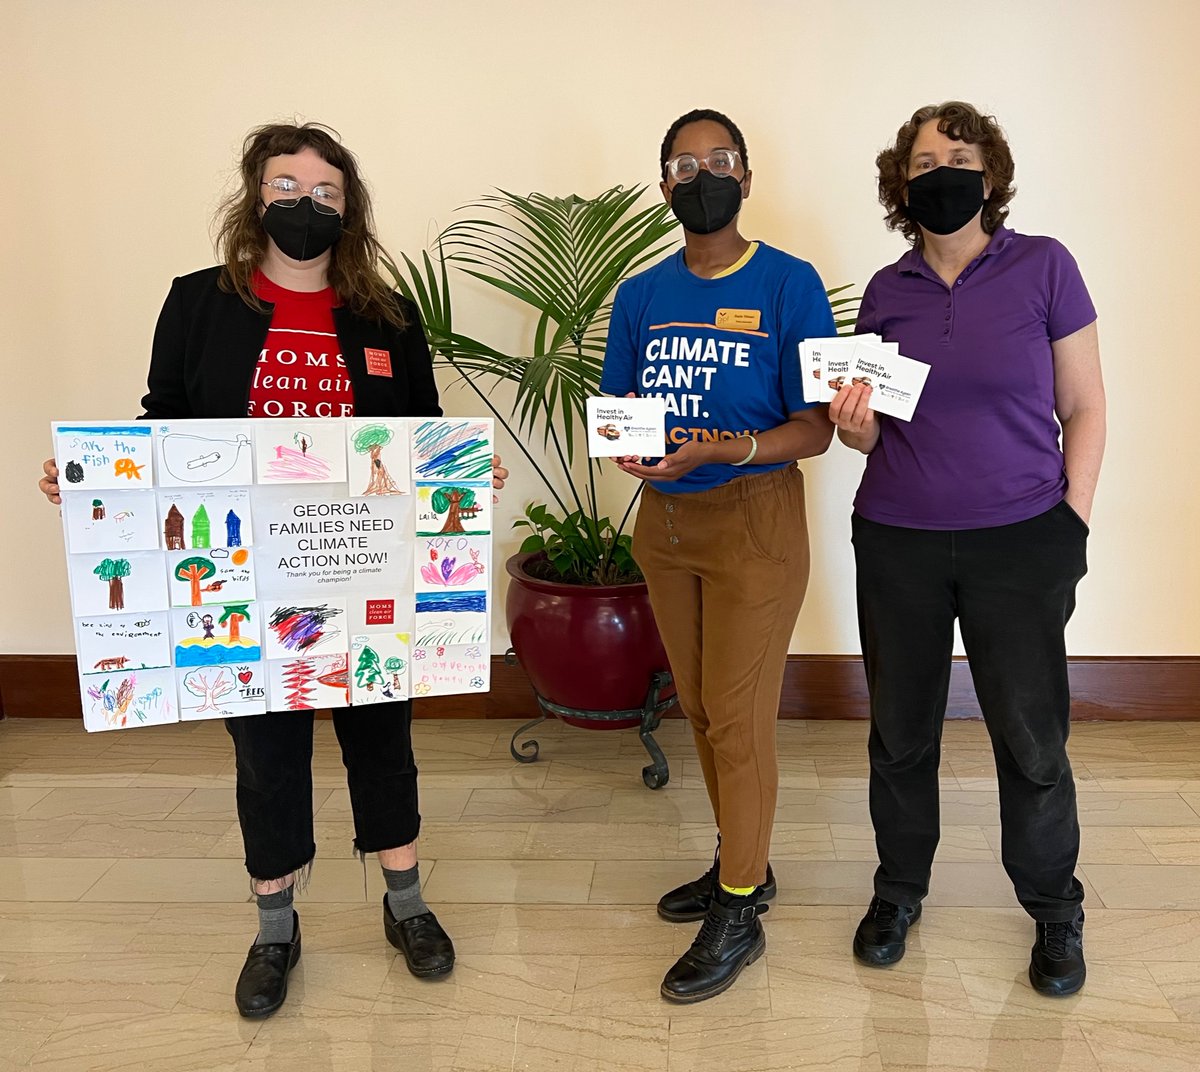 Today @mocleanair,  @GeorgiaIPL and @CleanAirMoms_GA   delivered postcards to @SenatorWarnock asking for more funding for #EVschoolbuses! #EV schoolbuses are better for kids health and learning! #post4theplanet #cleanair4kids #CleanAir #ClimateAction